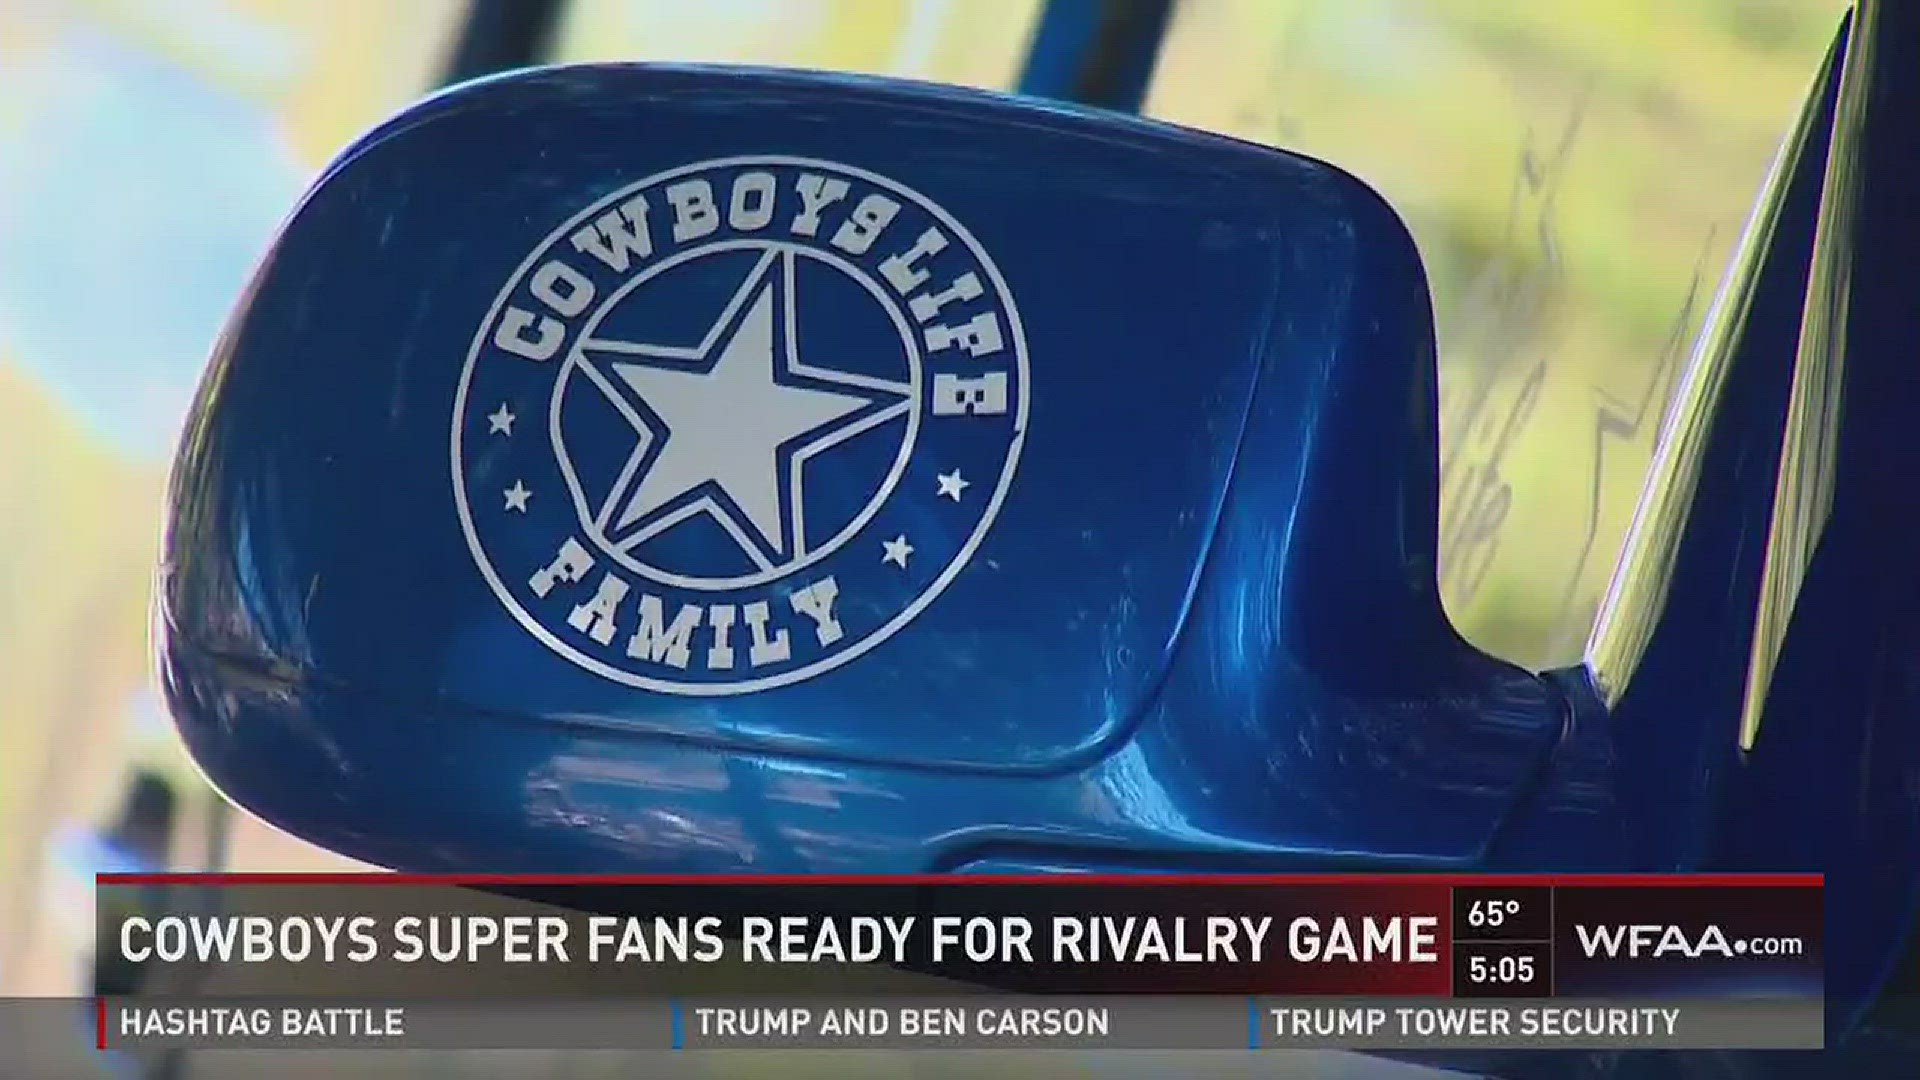 Cowboys super fans ready for rivalry game